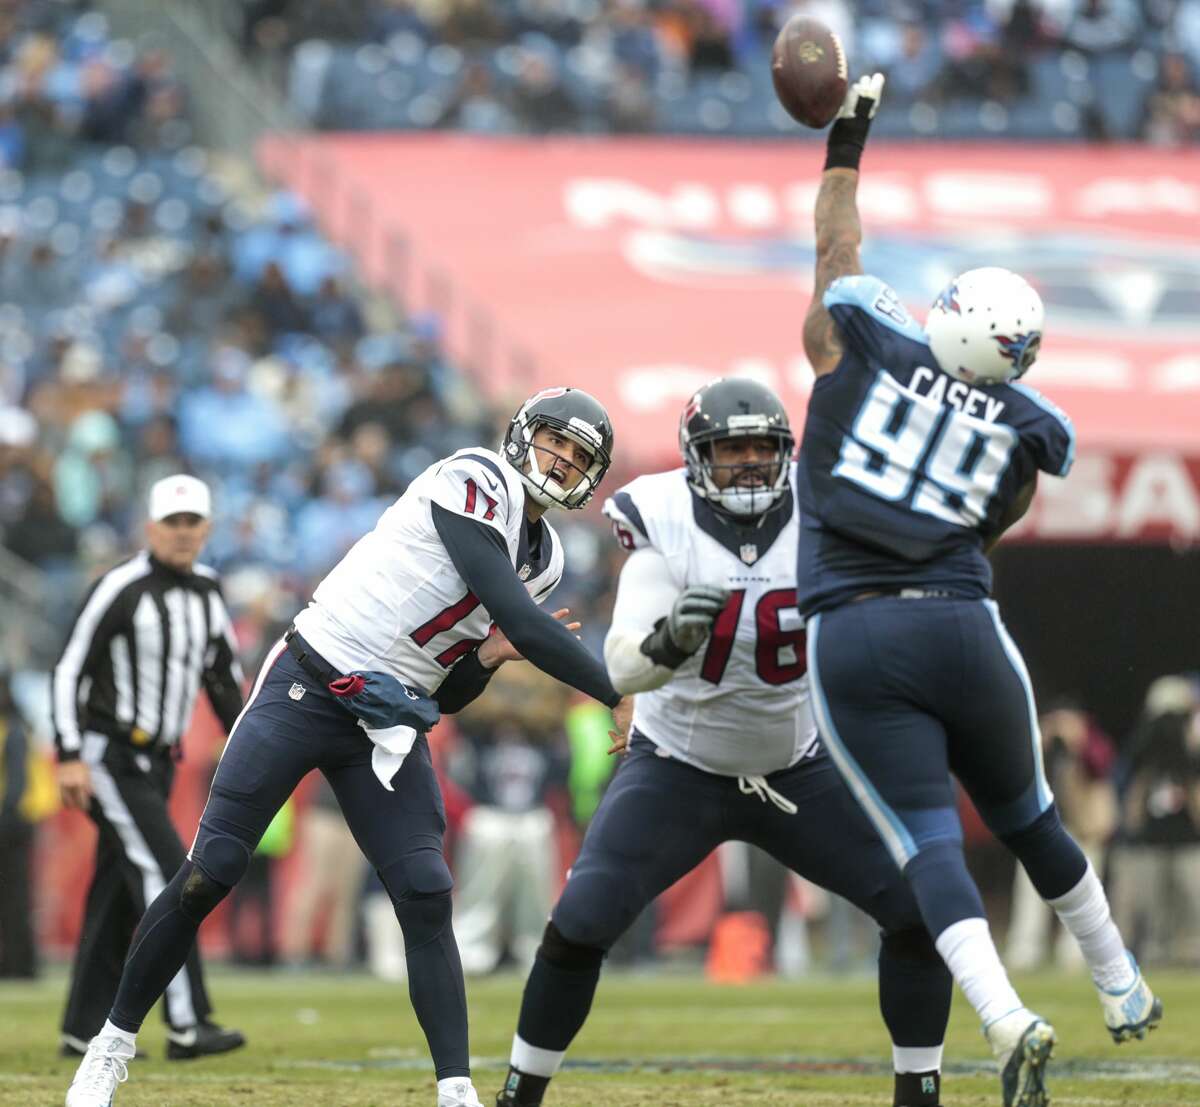 Tennessee Titans defensive end Jurrell Casey (99) knocks down a pass by Houston Texans quarterback Brock Osweiler (17) during the second quarter of an NFL football game at Nissan Stadium on Sunday, Jan. 1, 2017, in Nashville. ( Brett Coomer / Houston Chronicle )